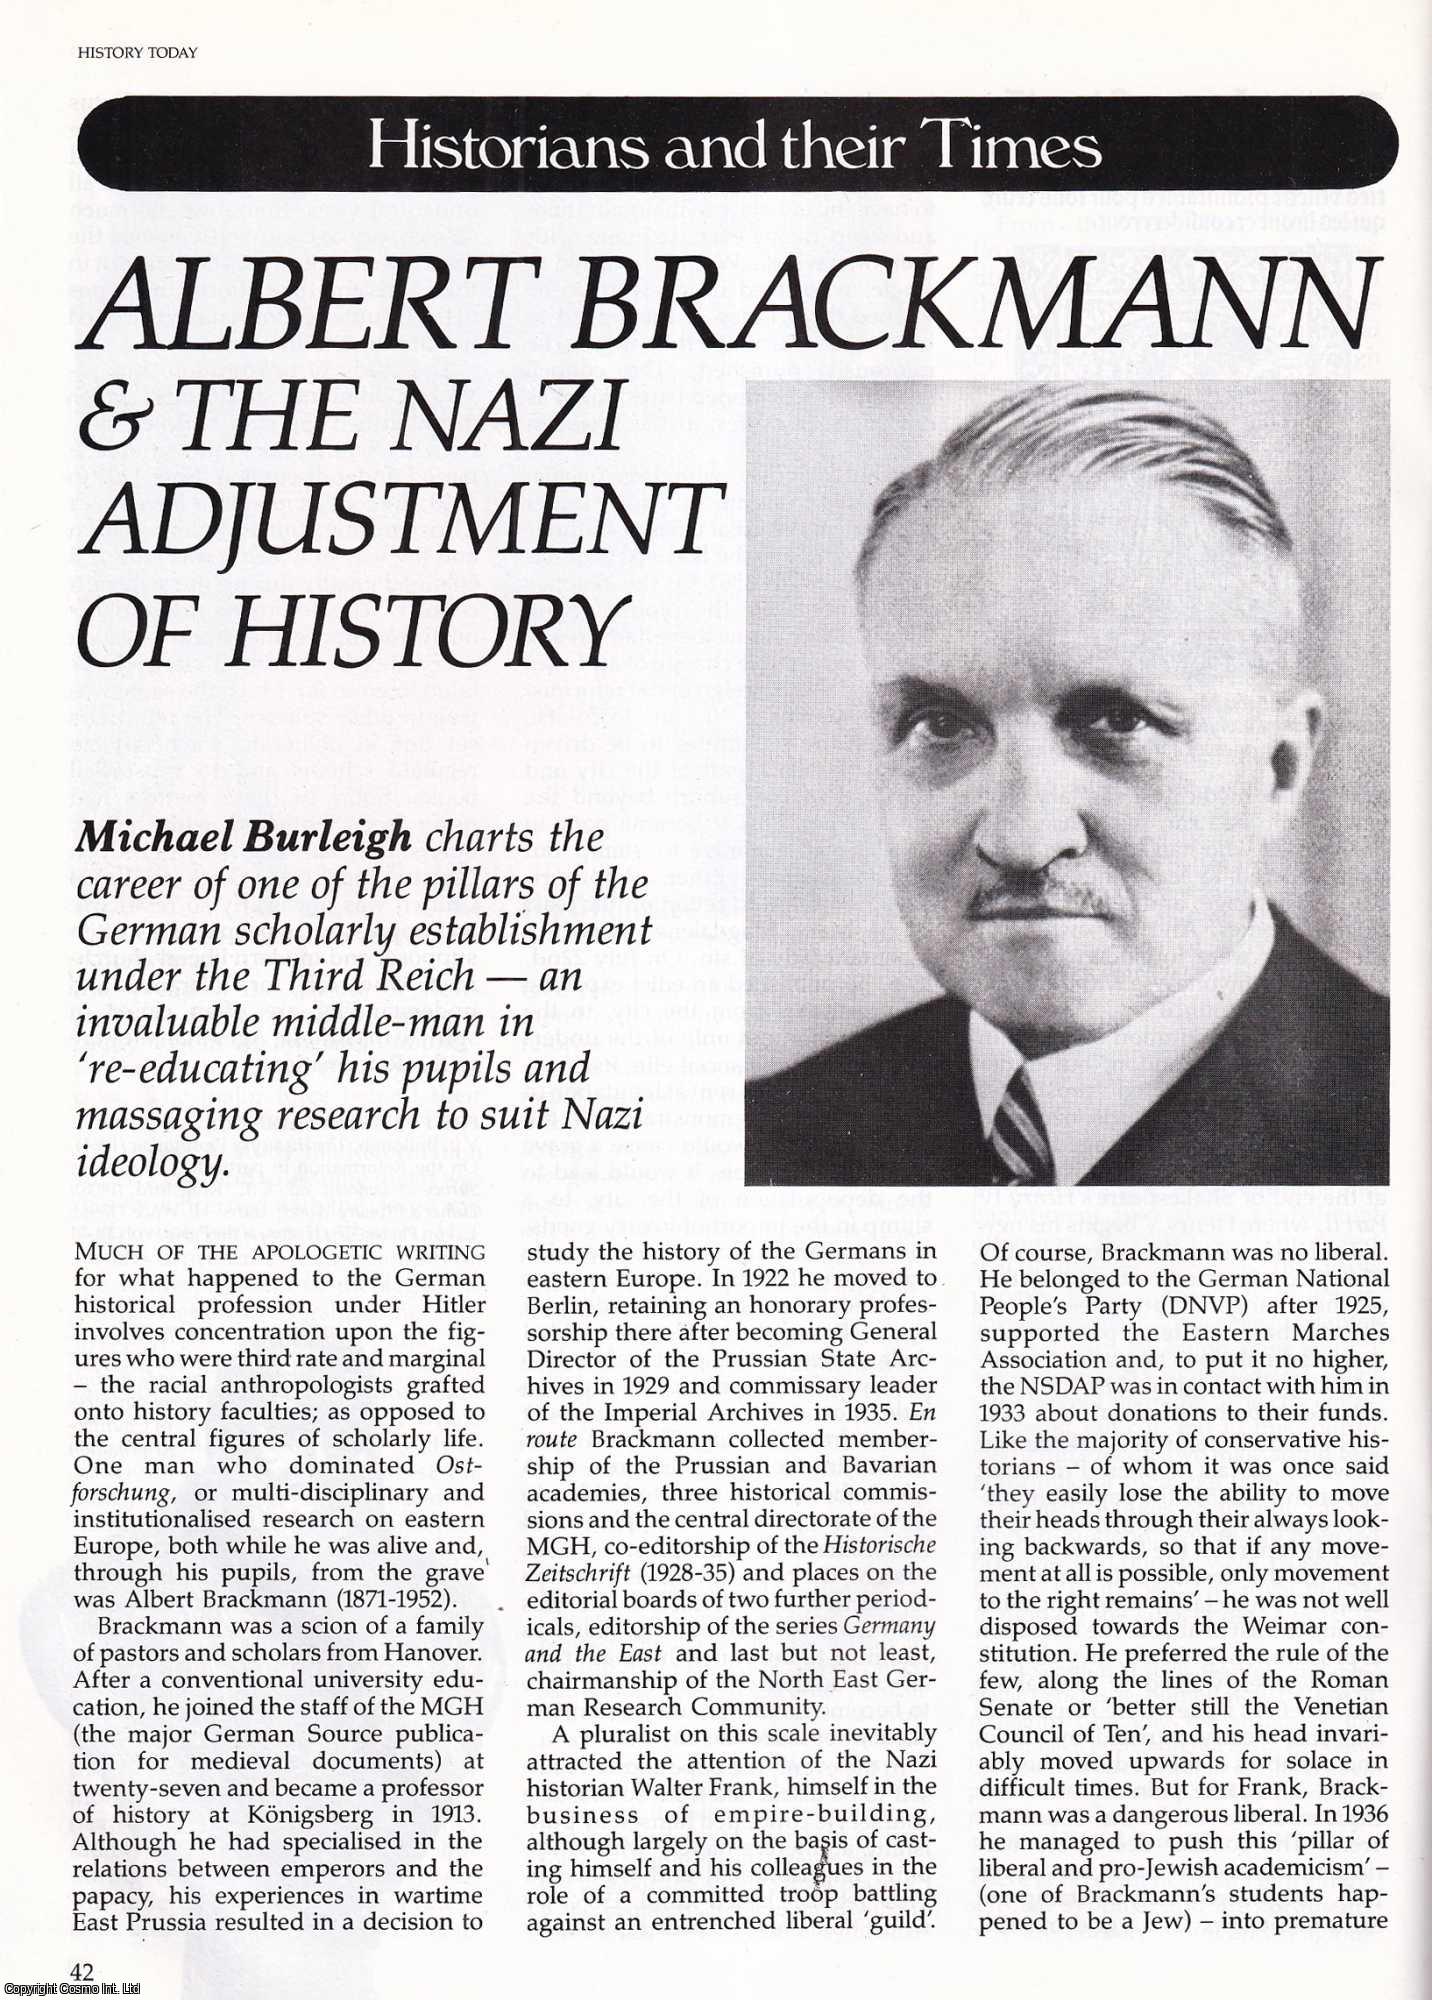 Michael Burleigh - Albert Brackmann and the Nazi Adjustment of History. An original article from History Today, 1987.